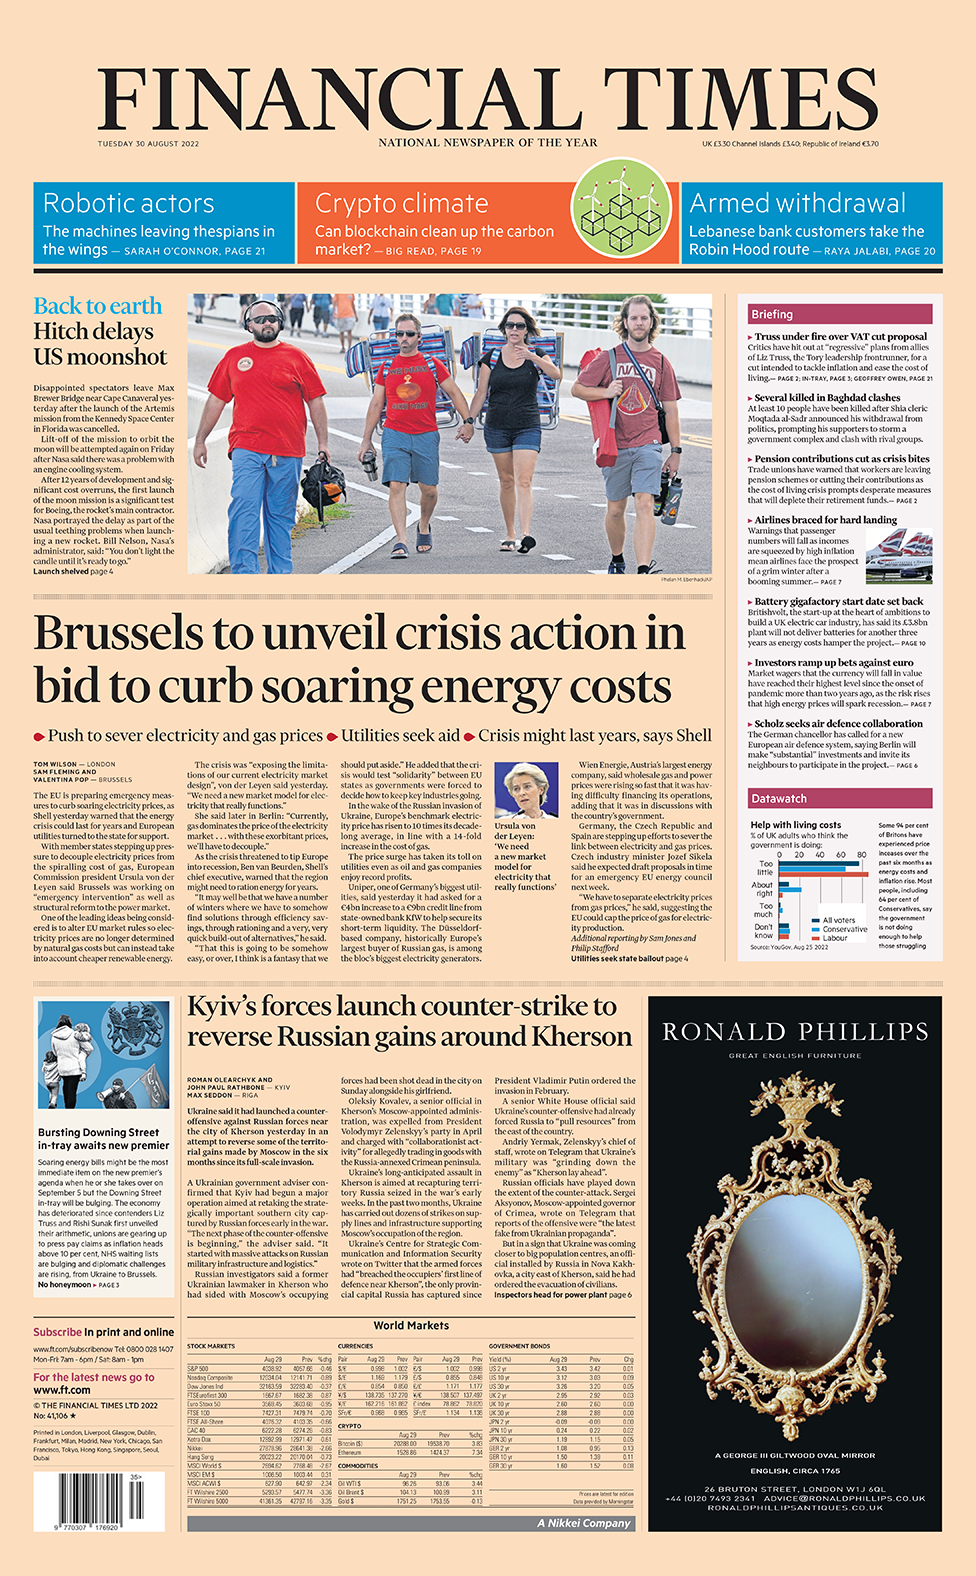 The headline in the Financial Times reads 'Brussels to unveil crisis action in bid to curb soaring energy costs'